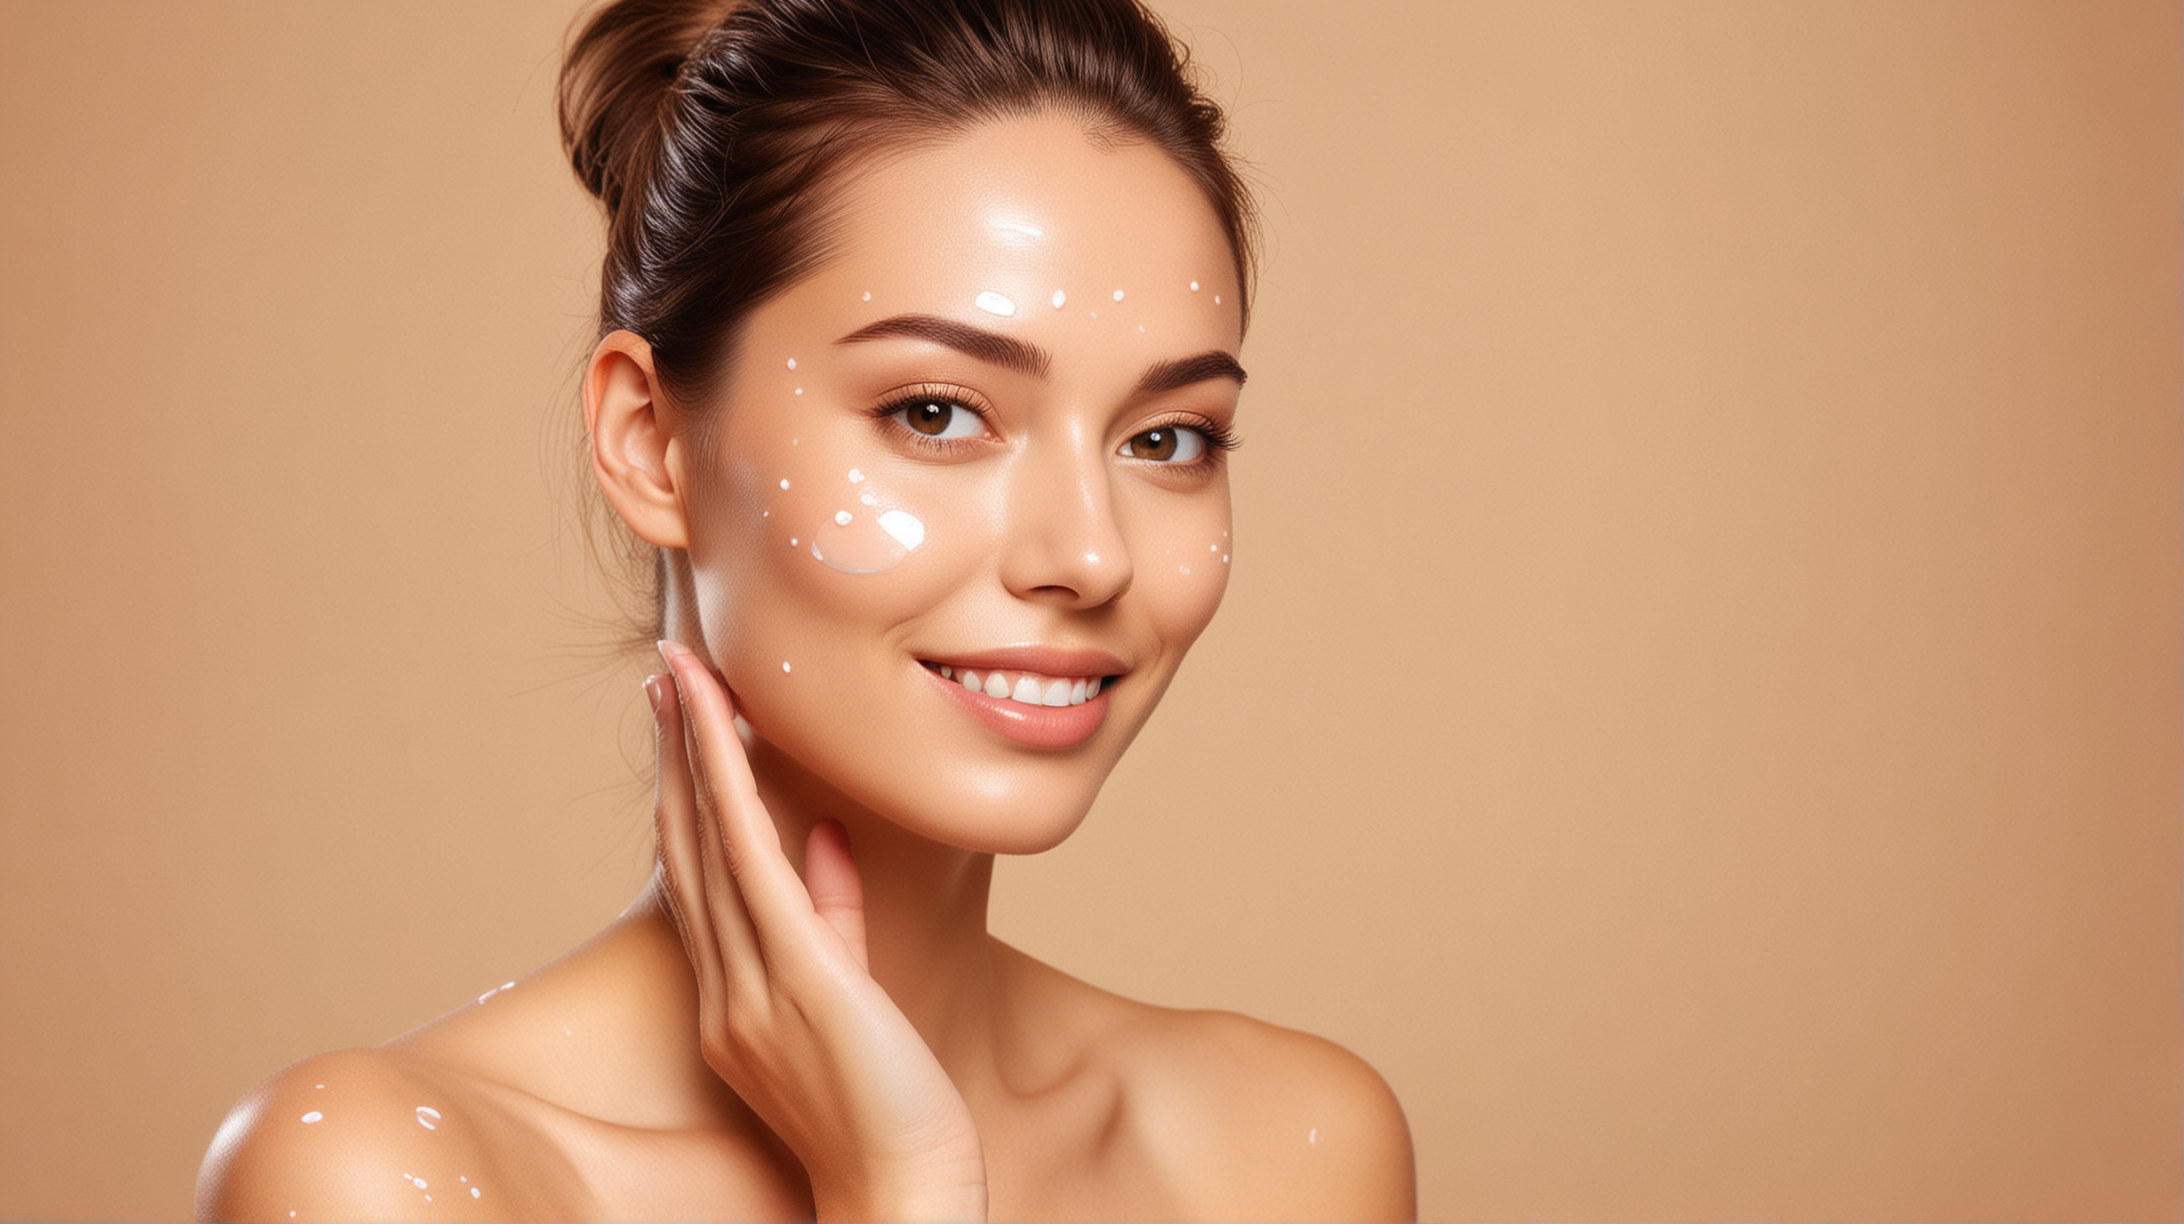 Person Applying Topical Glutathione with Radiant Skin and Skincare Products